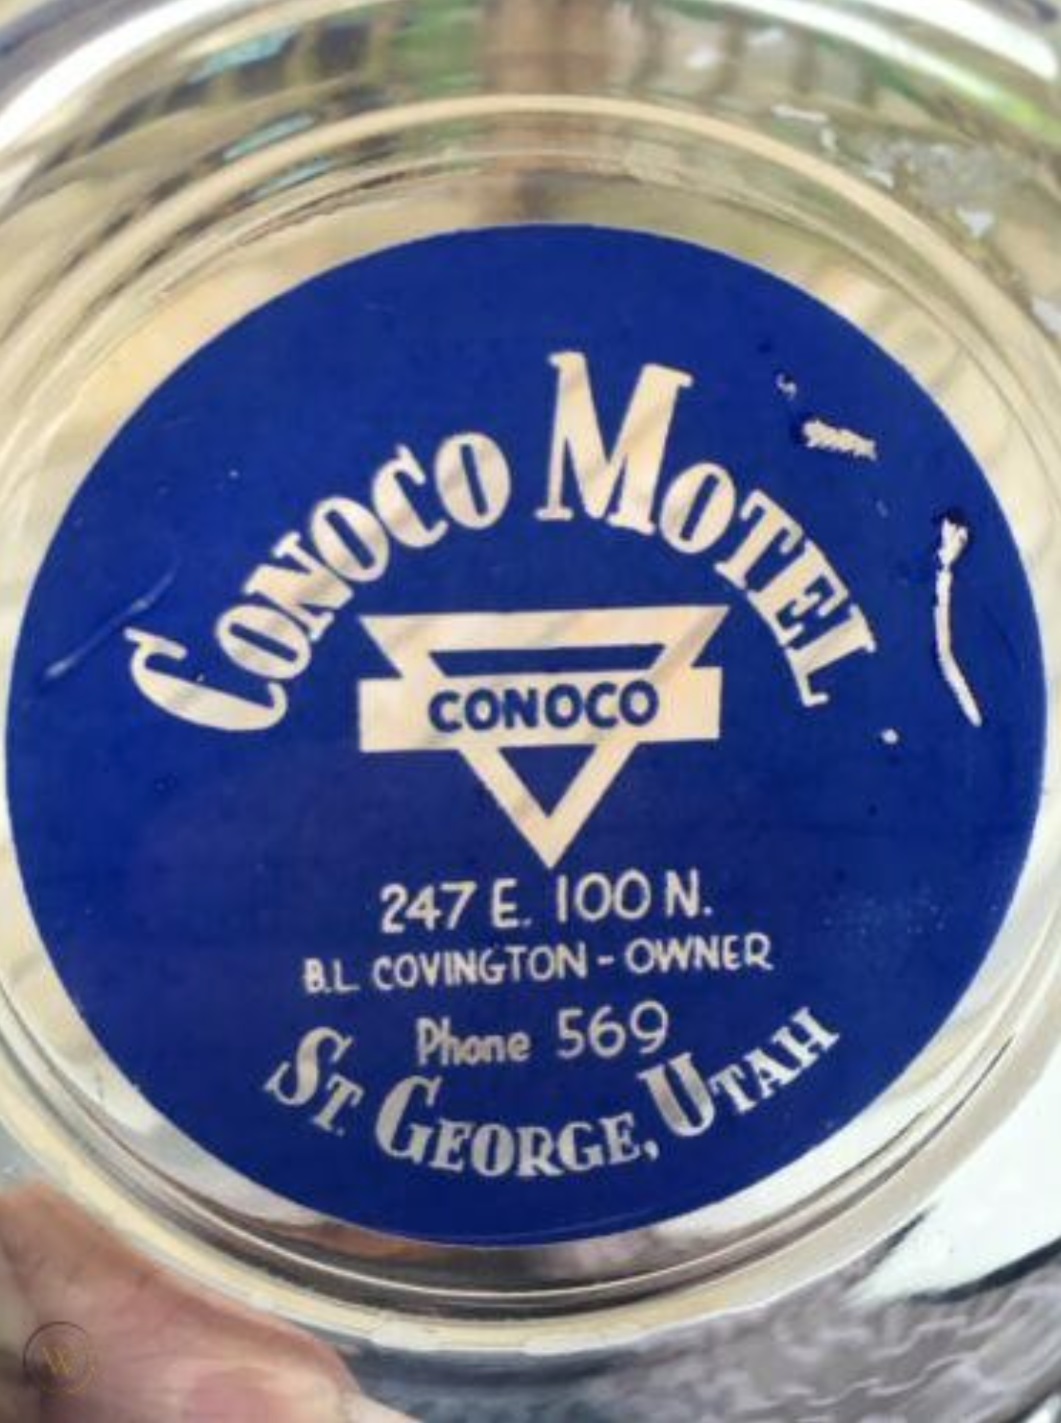 Vintage glass ashtray from the Conoco Motel